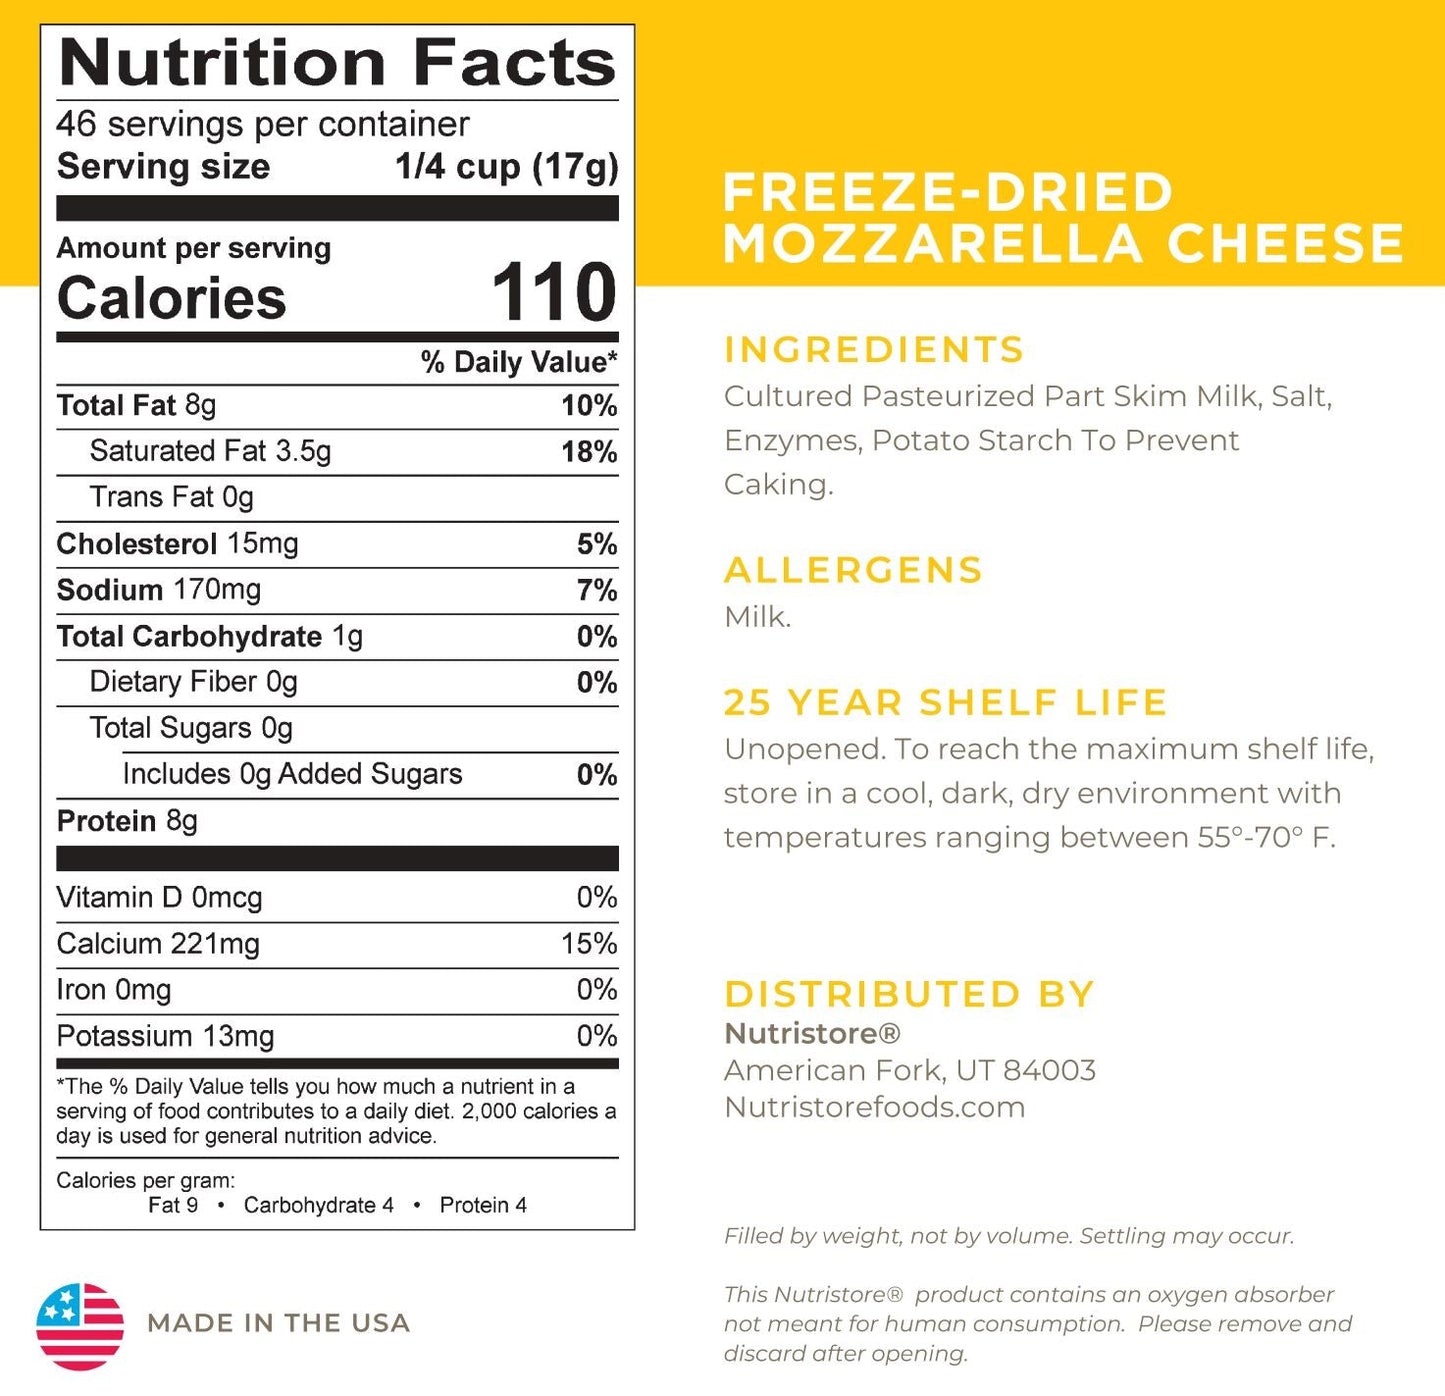 Mozzarella Cheese Freeze Dried - #10 Can by Nutristore